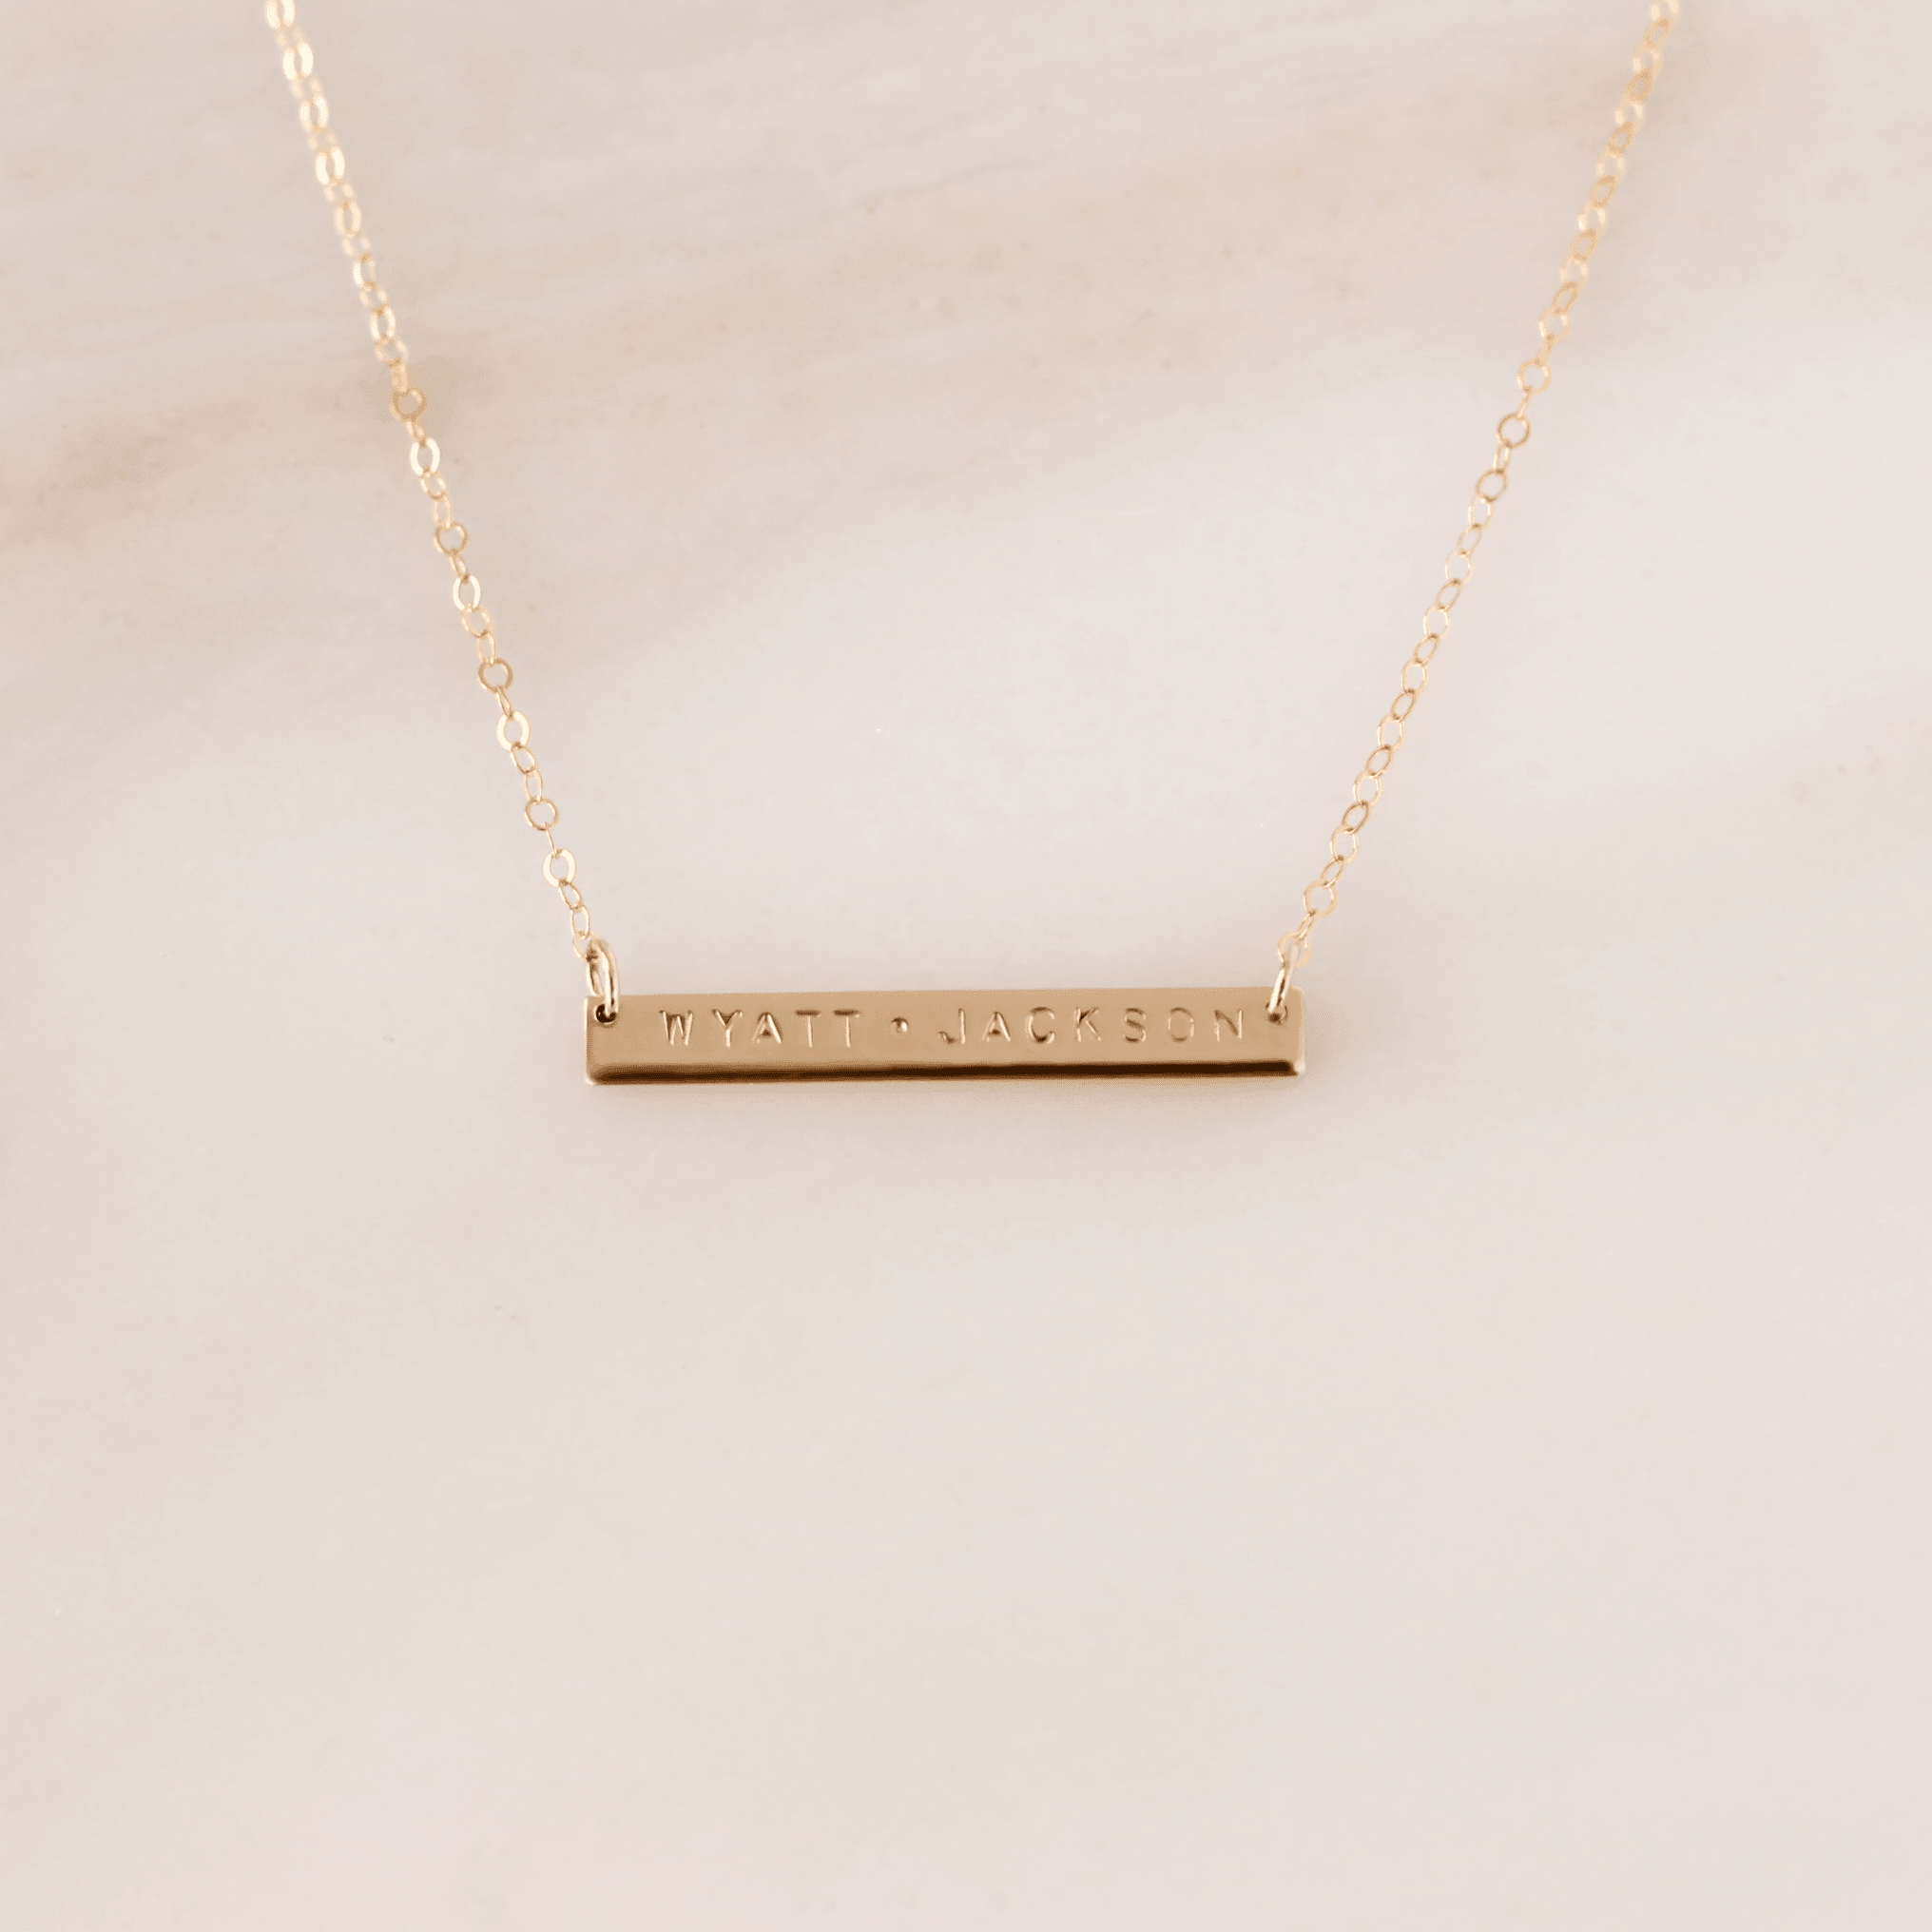 Slim Personalized Bar Necklace - Nolia Jewelry - Meaningful + Sustainably Handcrafted Jewelry